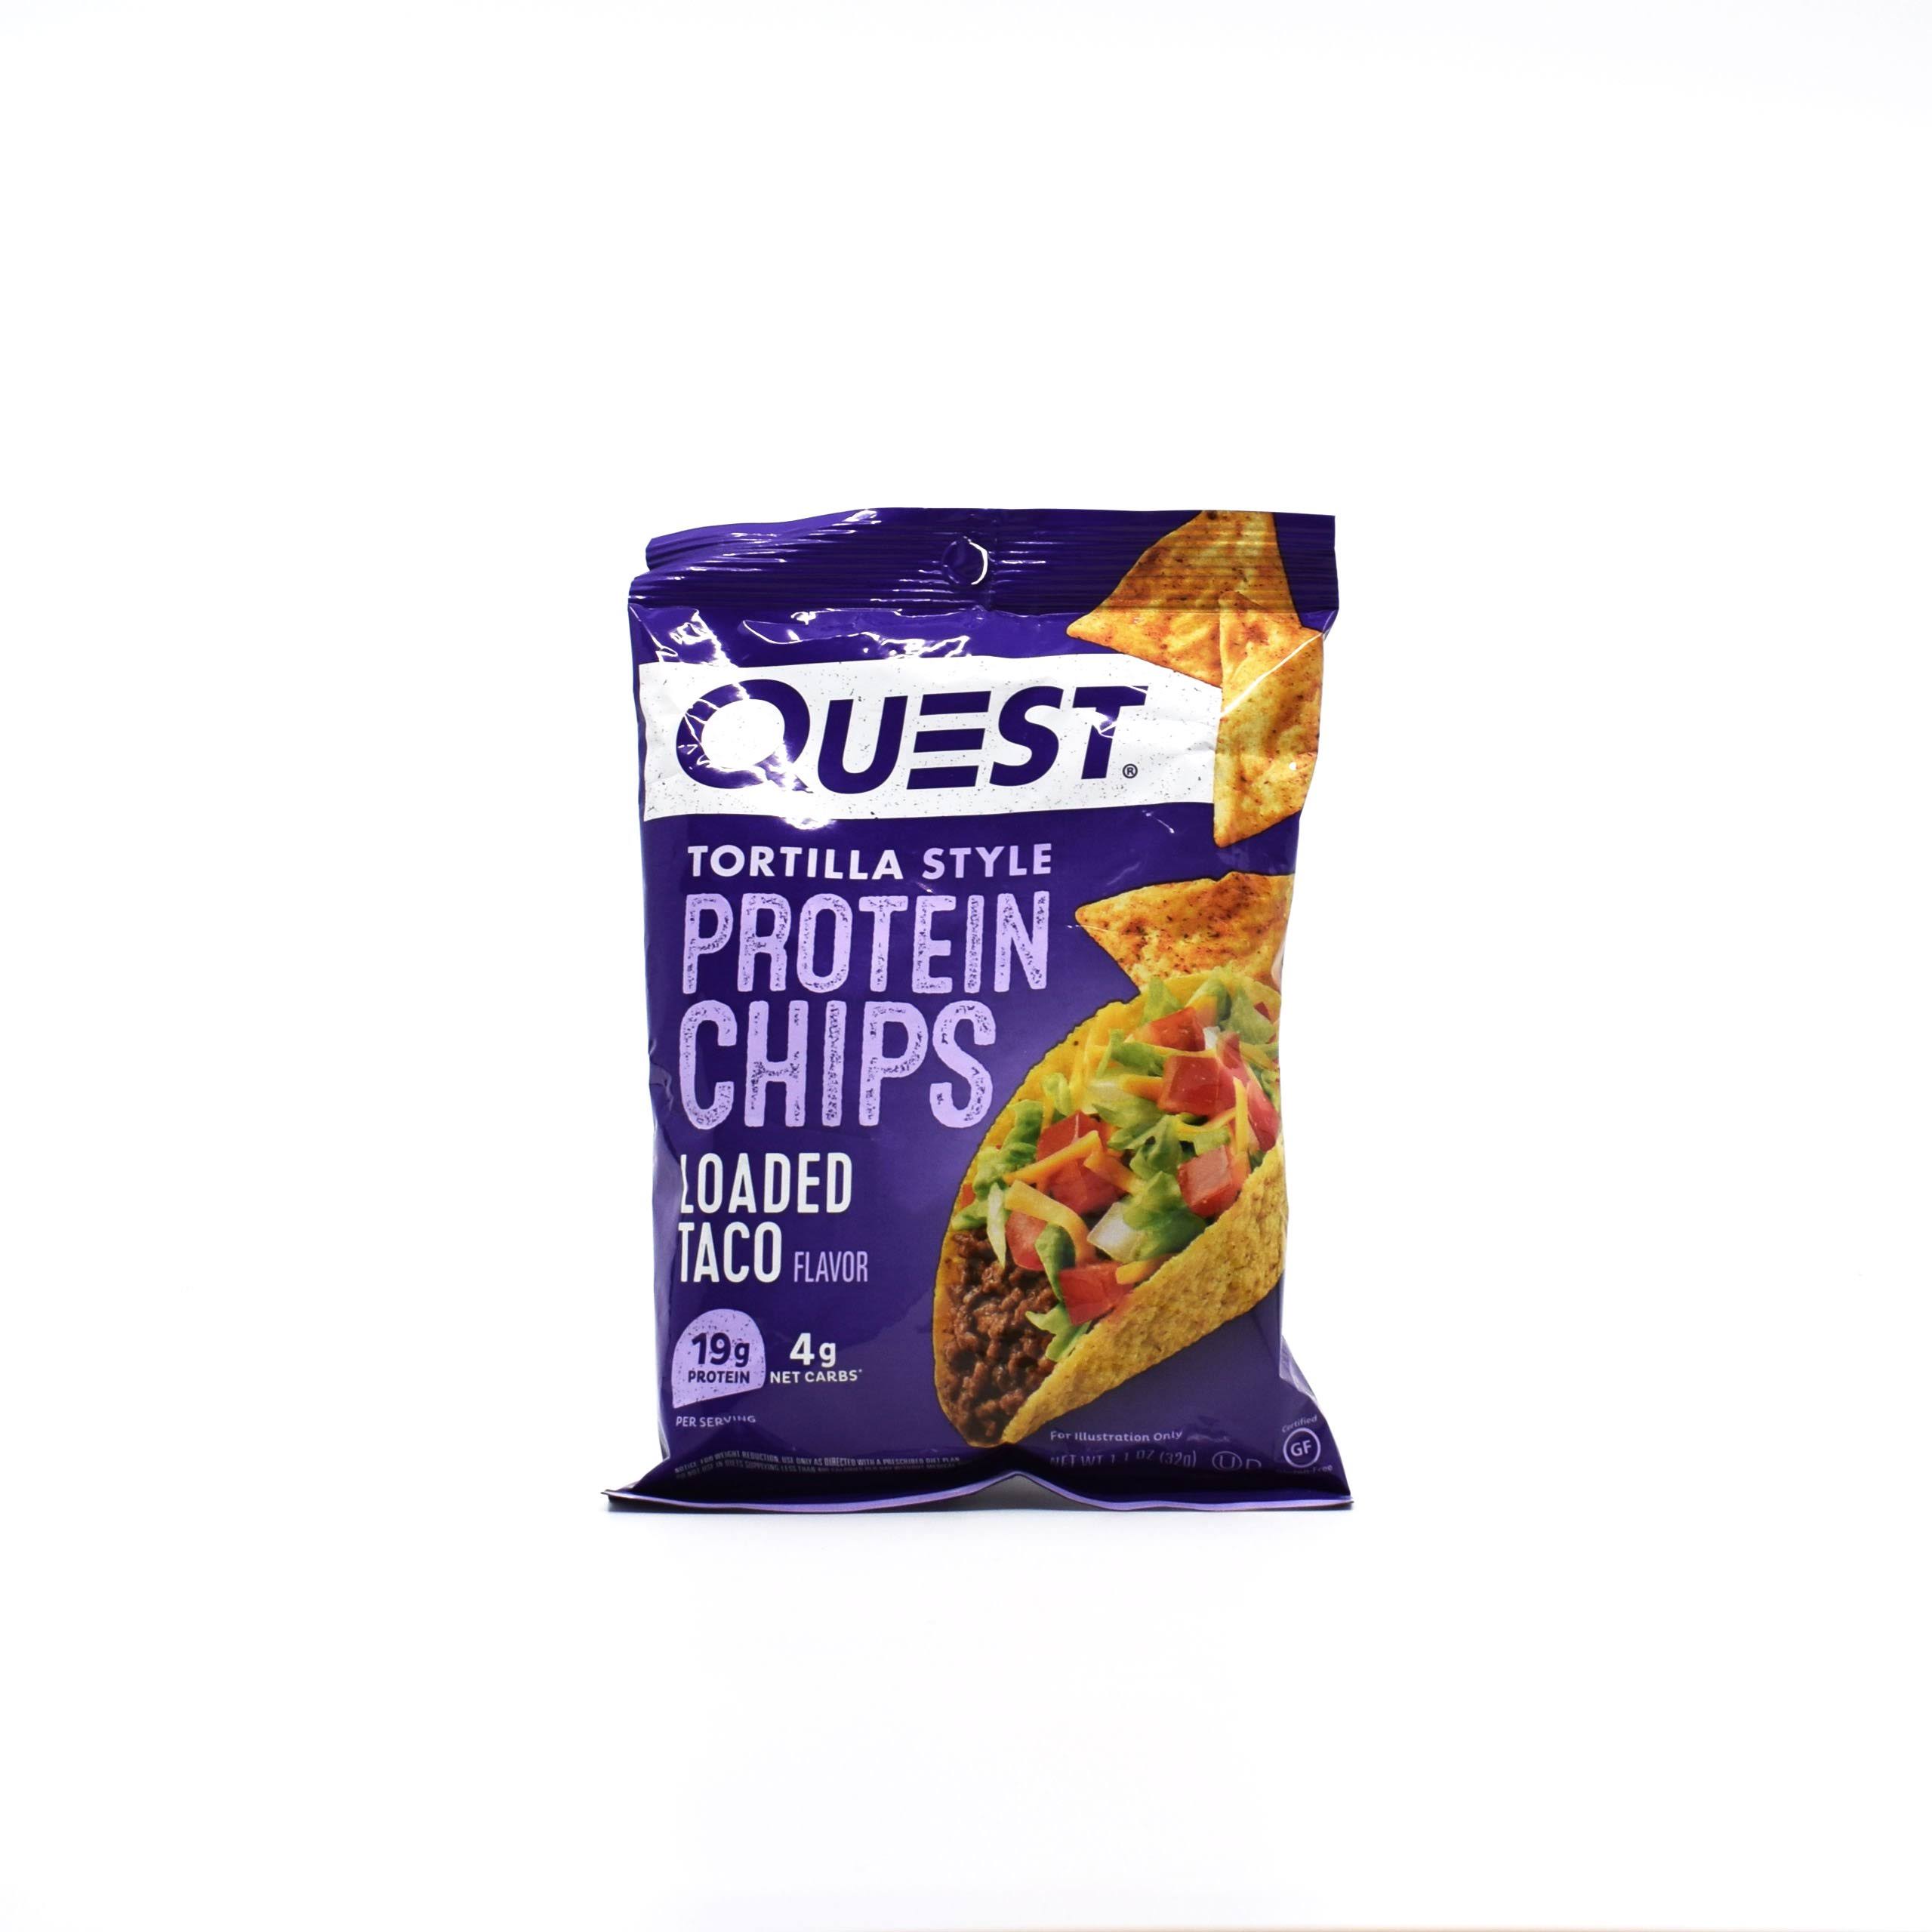 Quest Tortilla Protein Chips 32G Loaded Taco